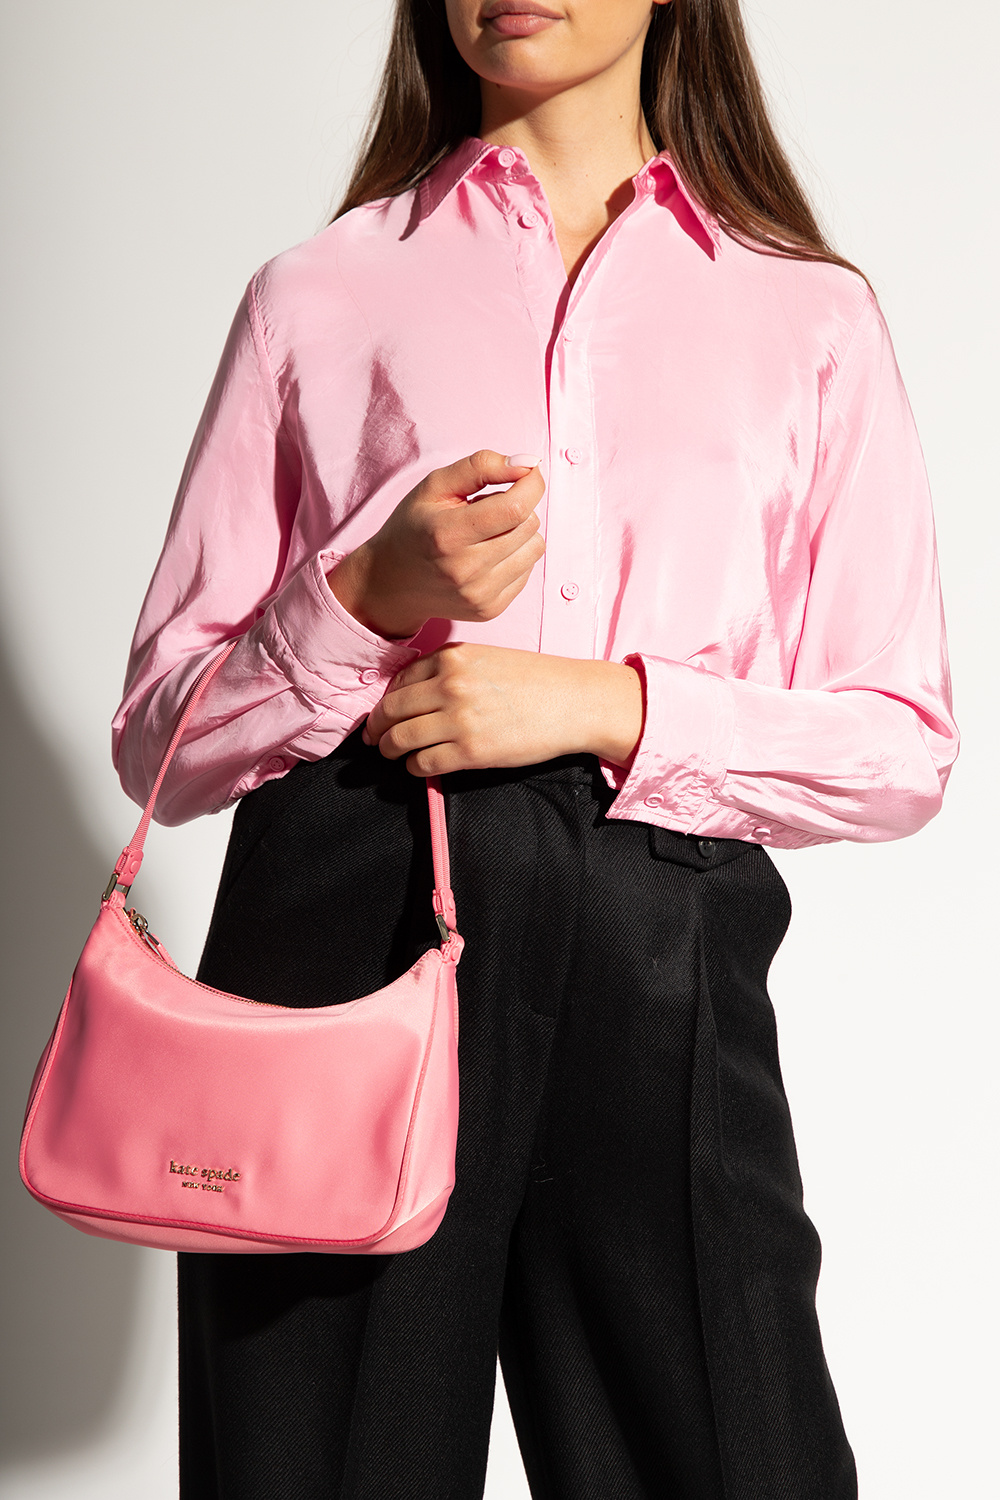 Locò Small Shoulder Bag In Calfskin for Woman in Pink Pp